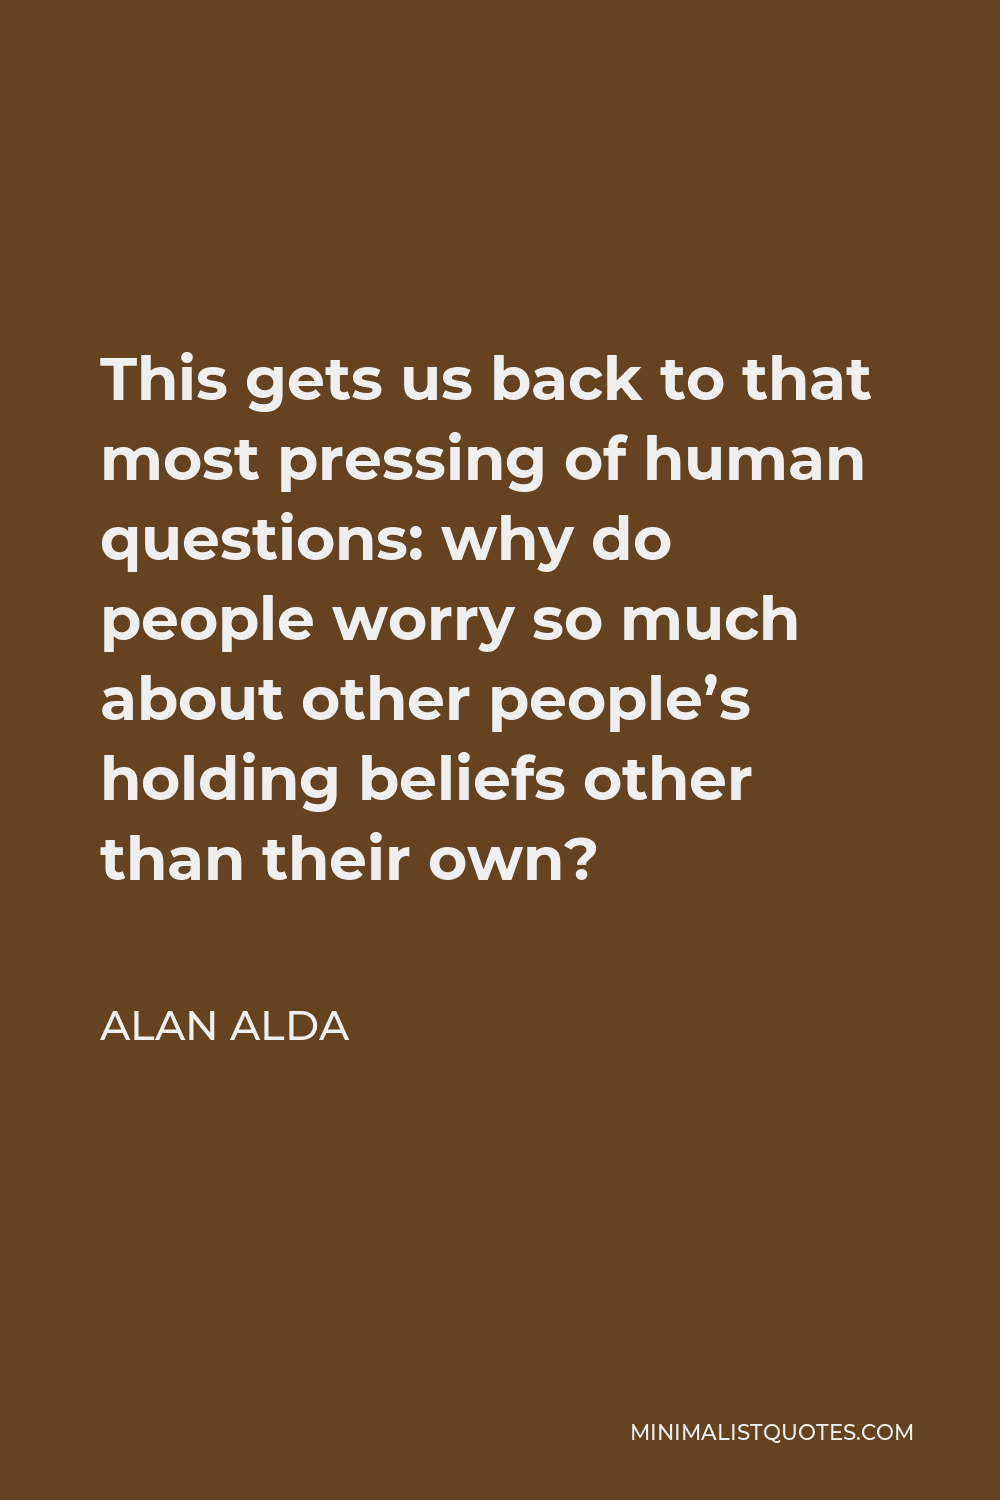 Alan Alda Quote - This gets us back to that most pressing of human questions: why do people worry so much about other people’s holding beliefs other than their own?